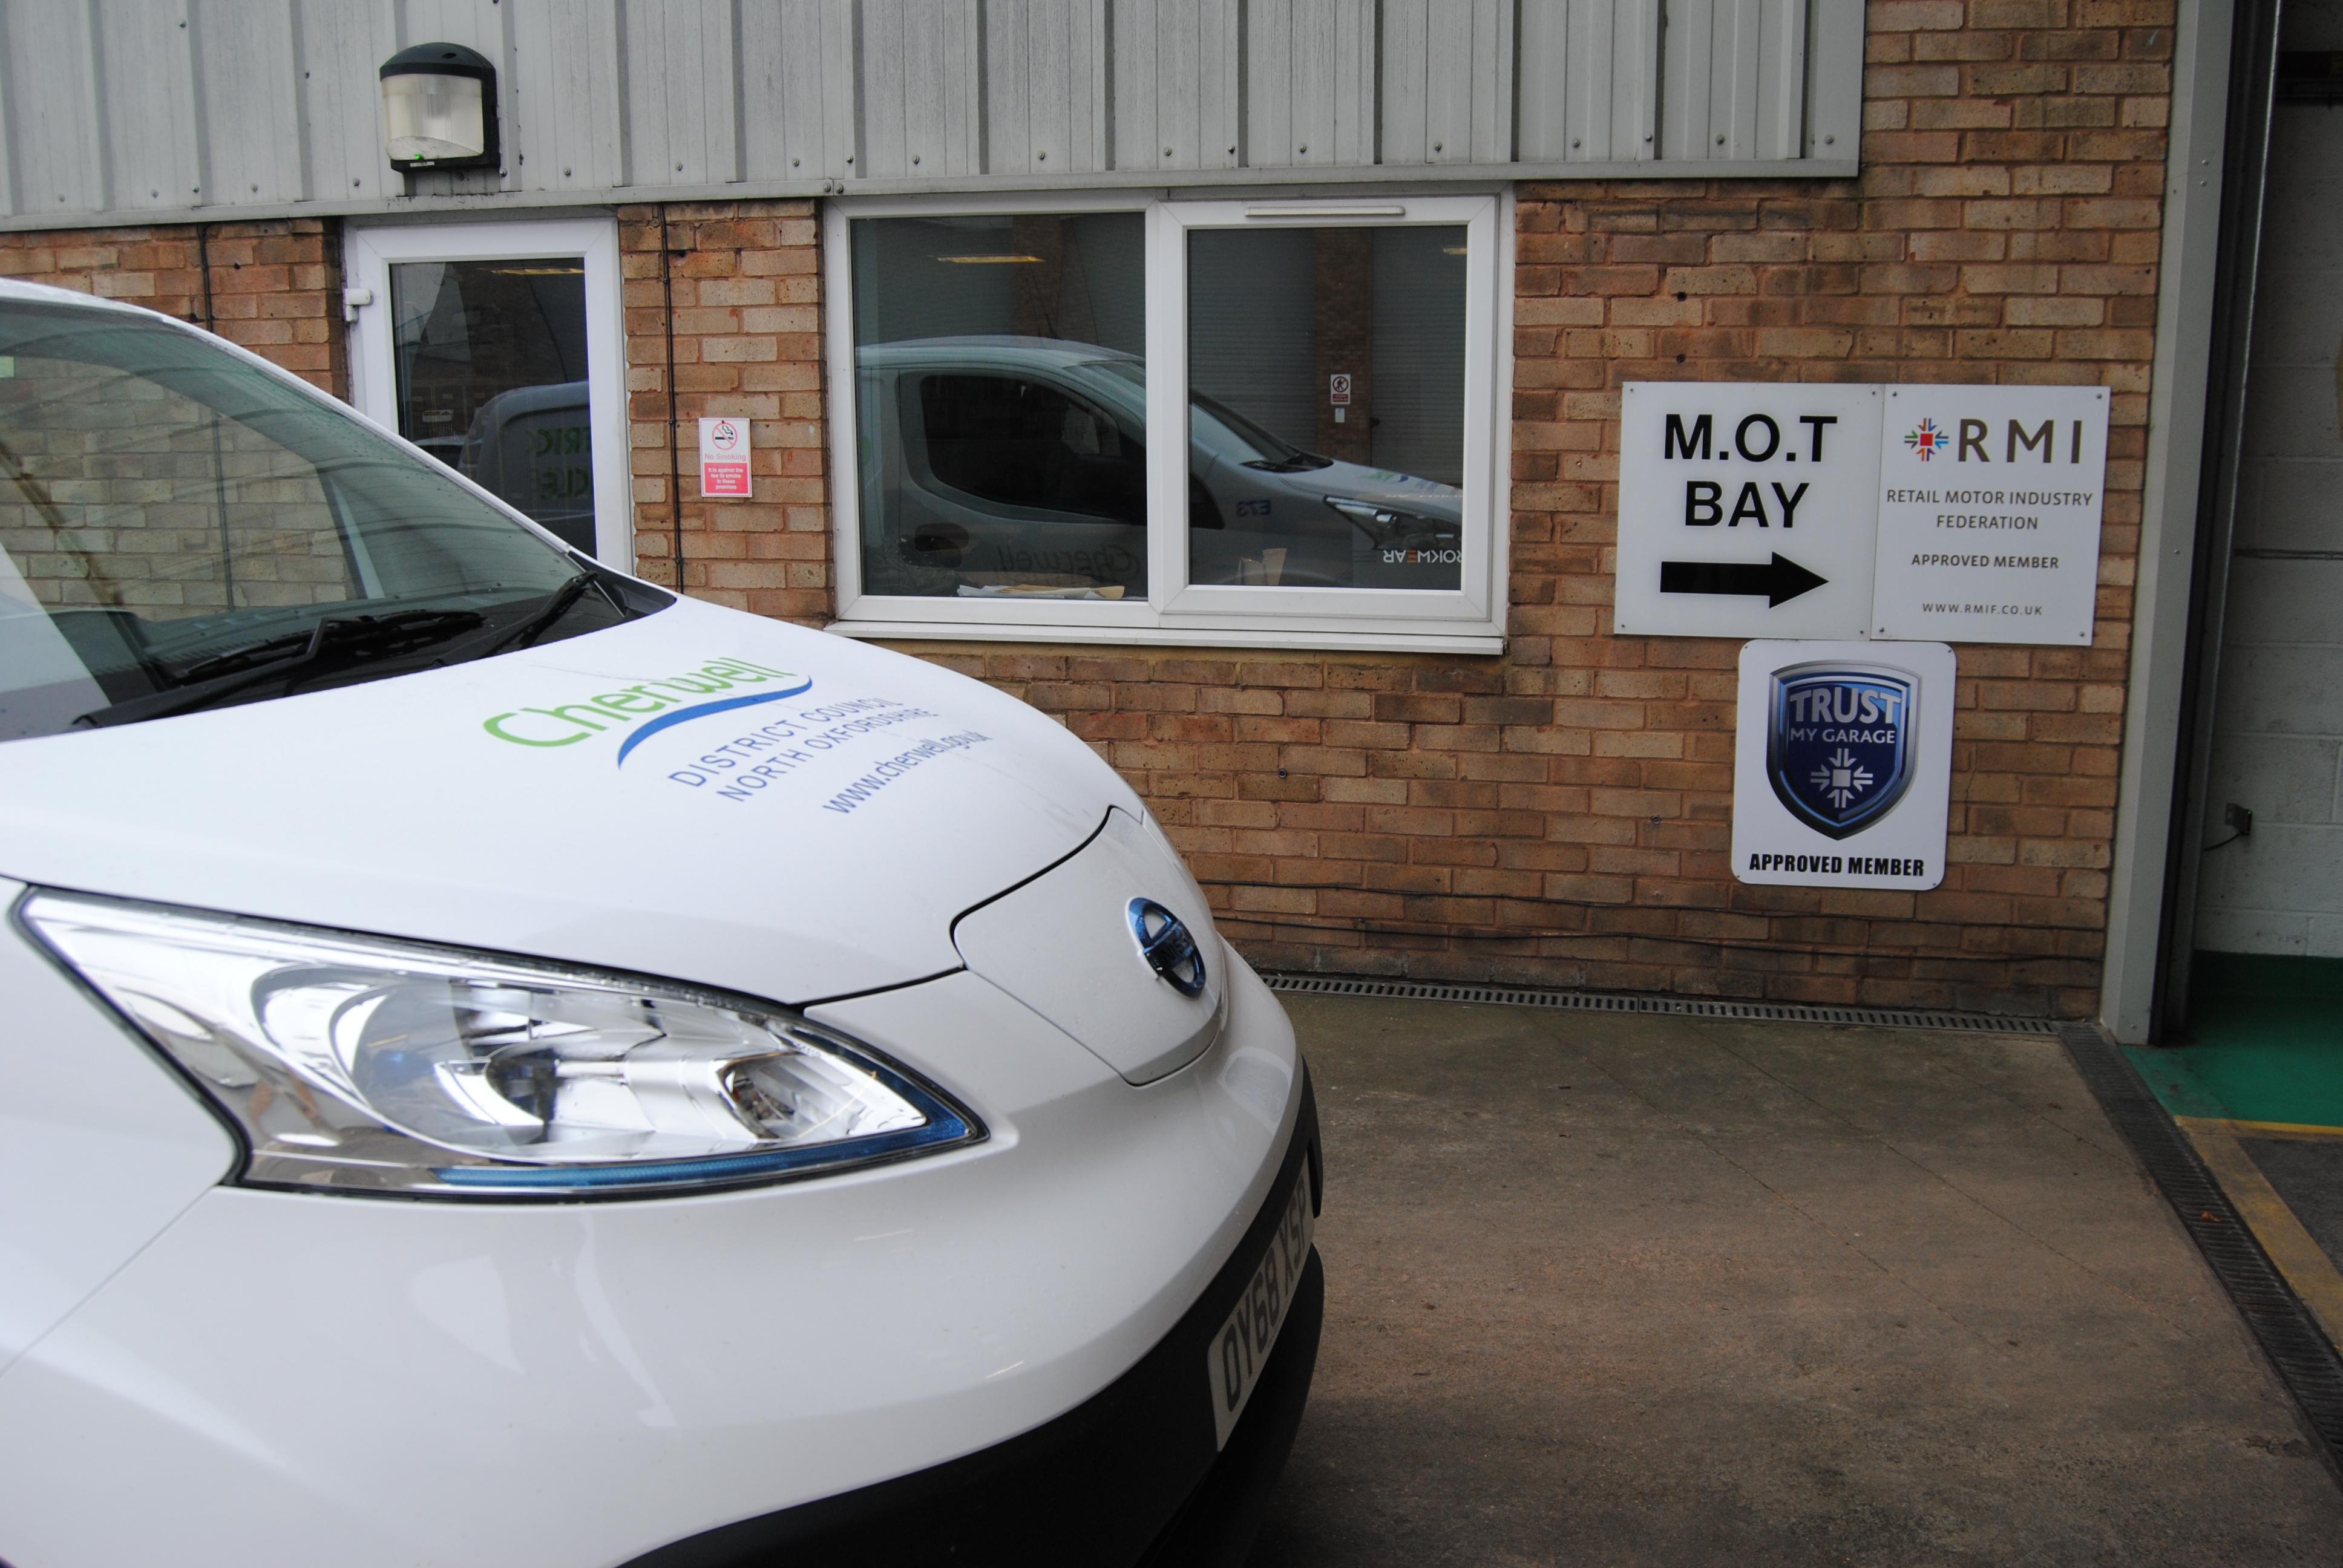 One of our electric vehicles is entering the MOT bay